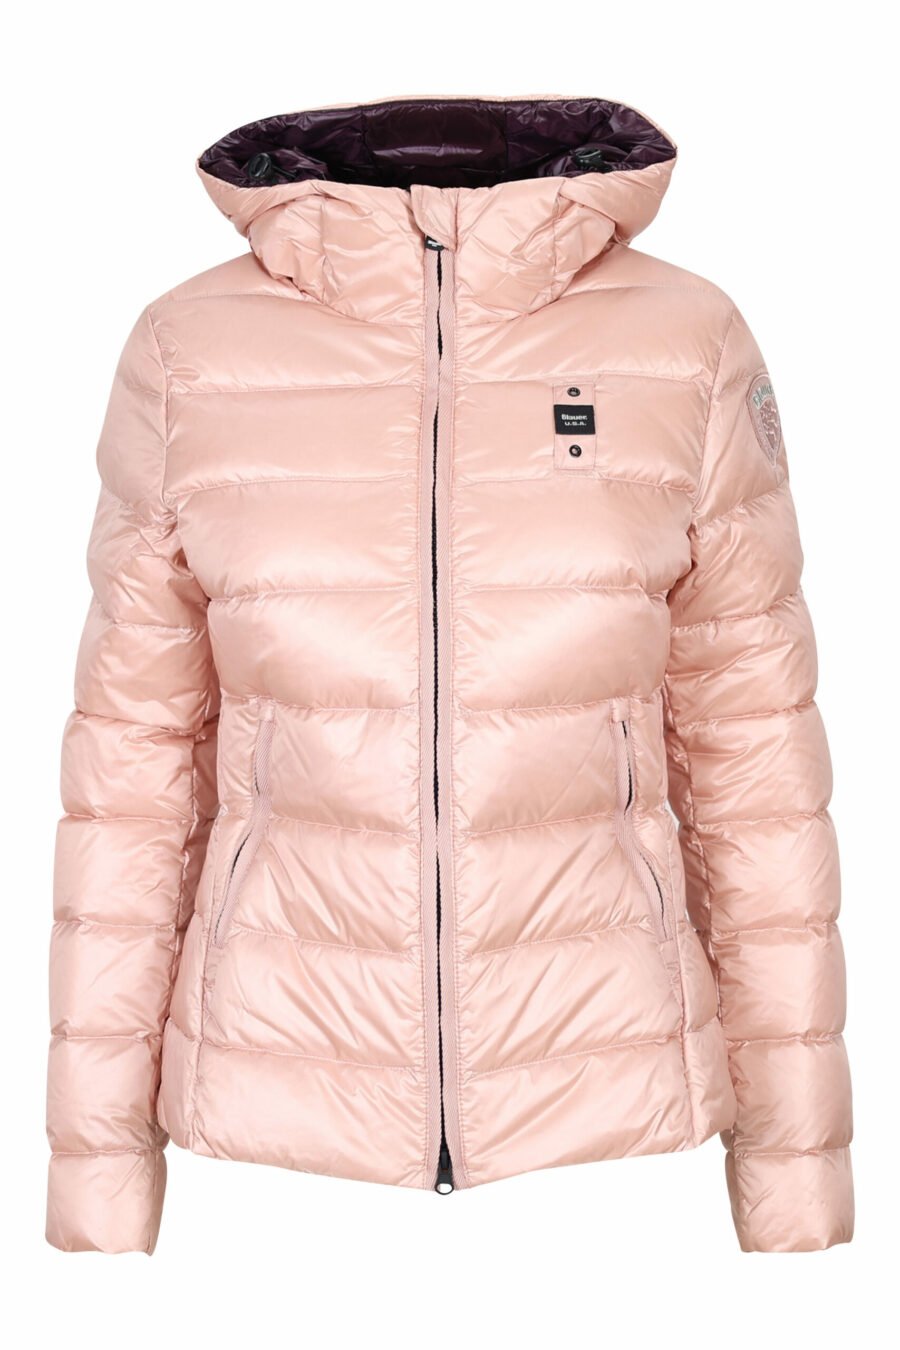 Pale pink hooded straight lined hooded jacket with purple inside and logo patch - 8058610673321 scaled